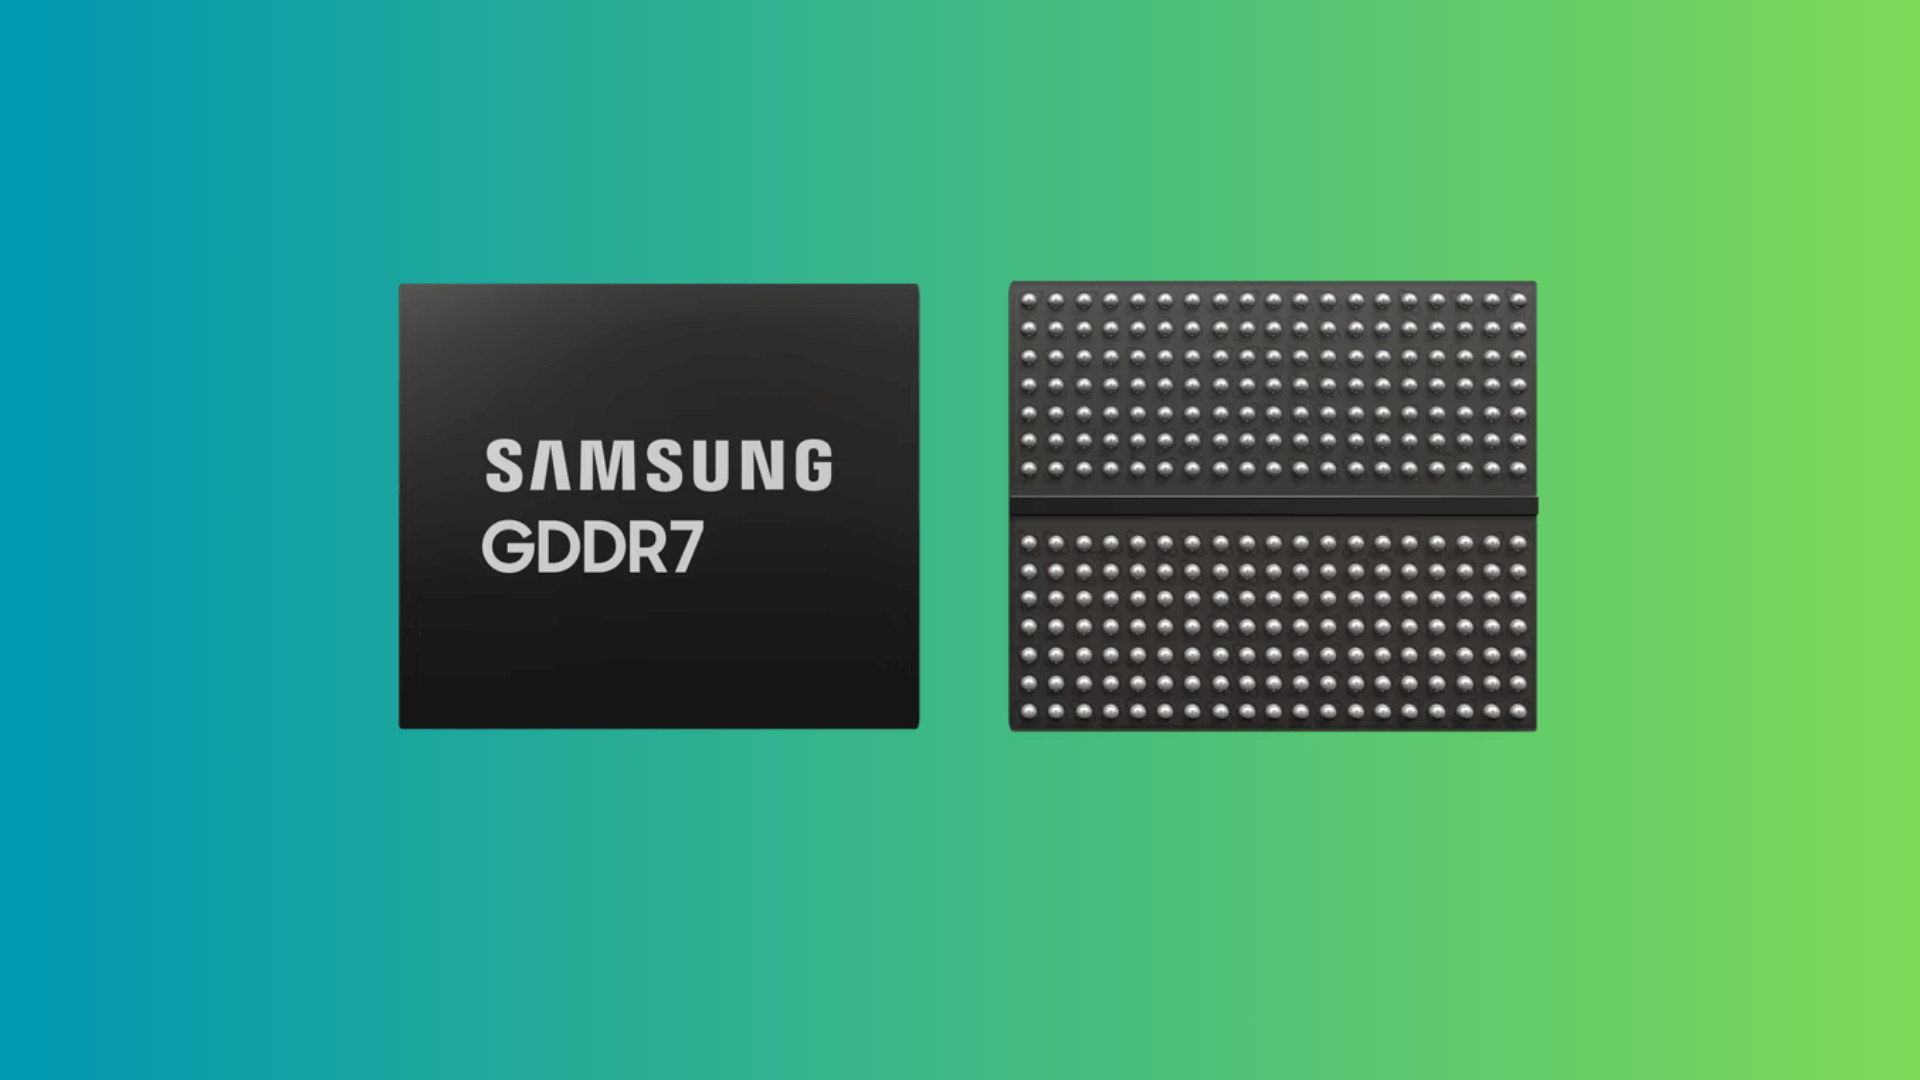 Samsung Spearheads Next-Generation Graphics with GDDR7 Memory